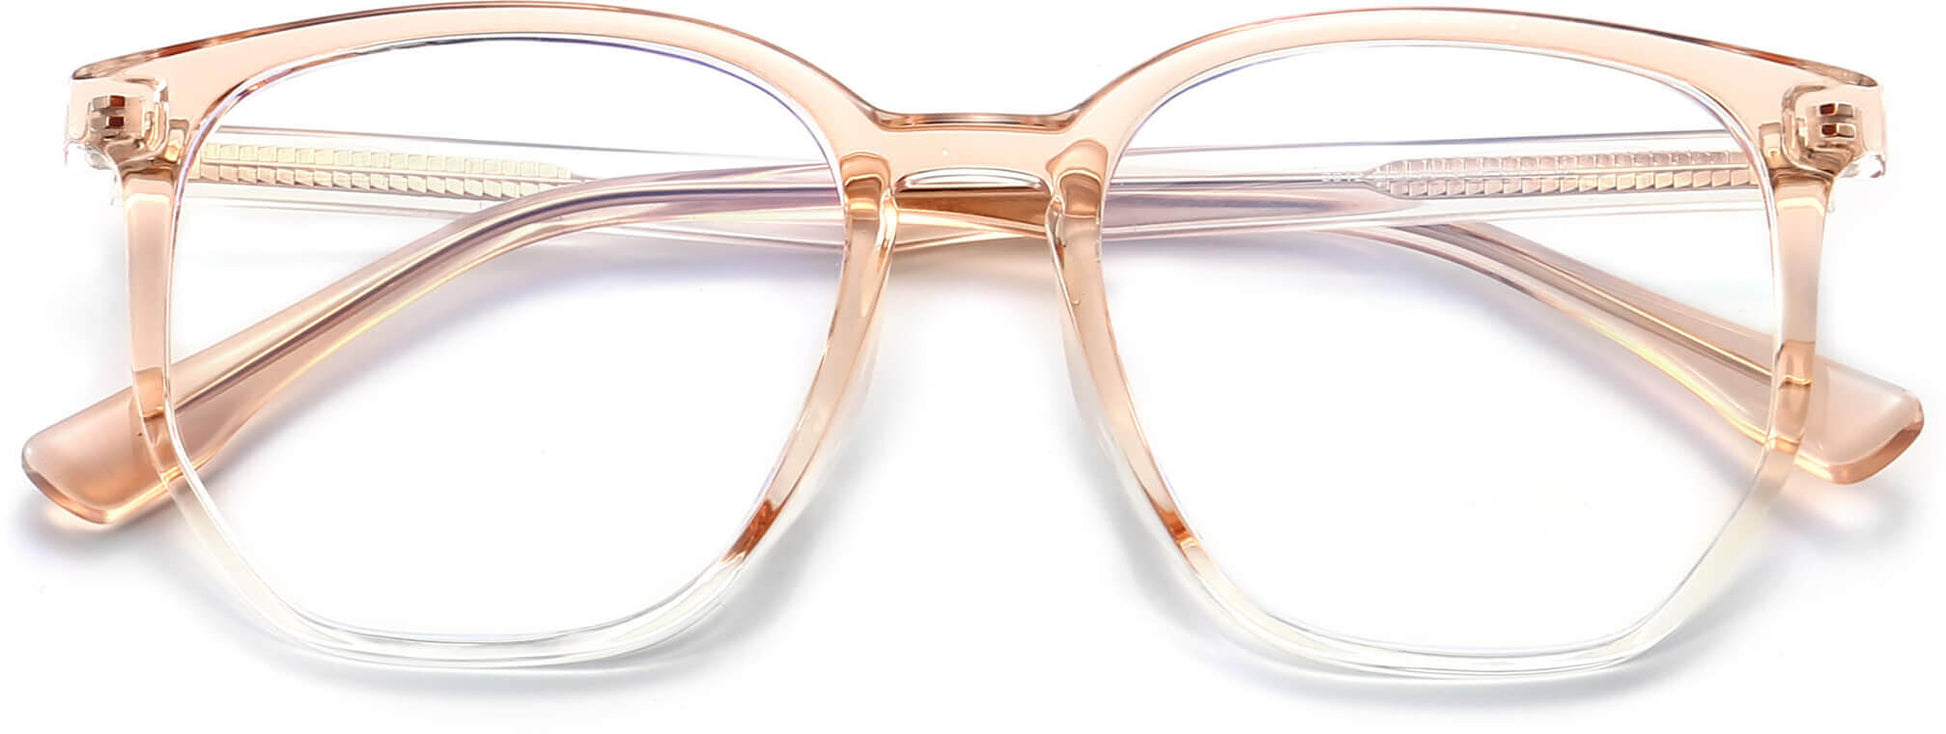 Dusty Rectangle Clear Eyeglasses from ANRRI, closed view